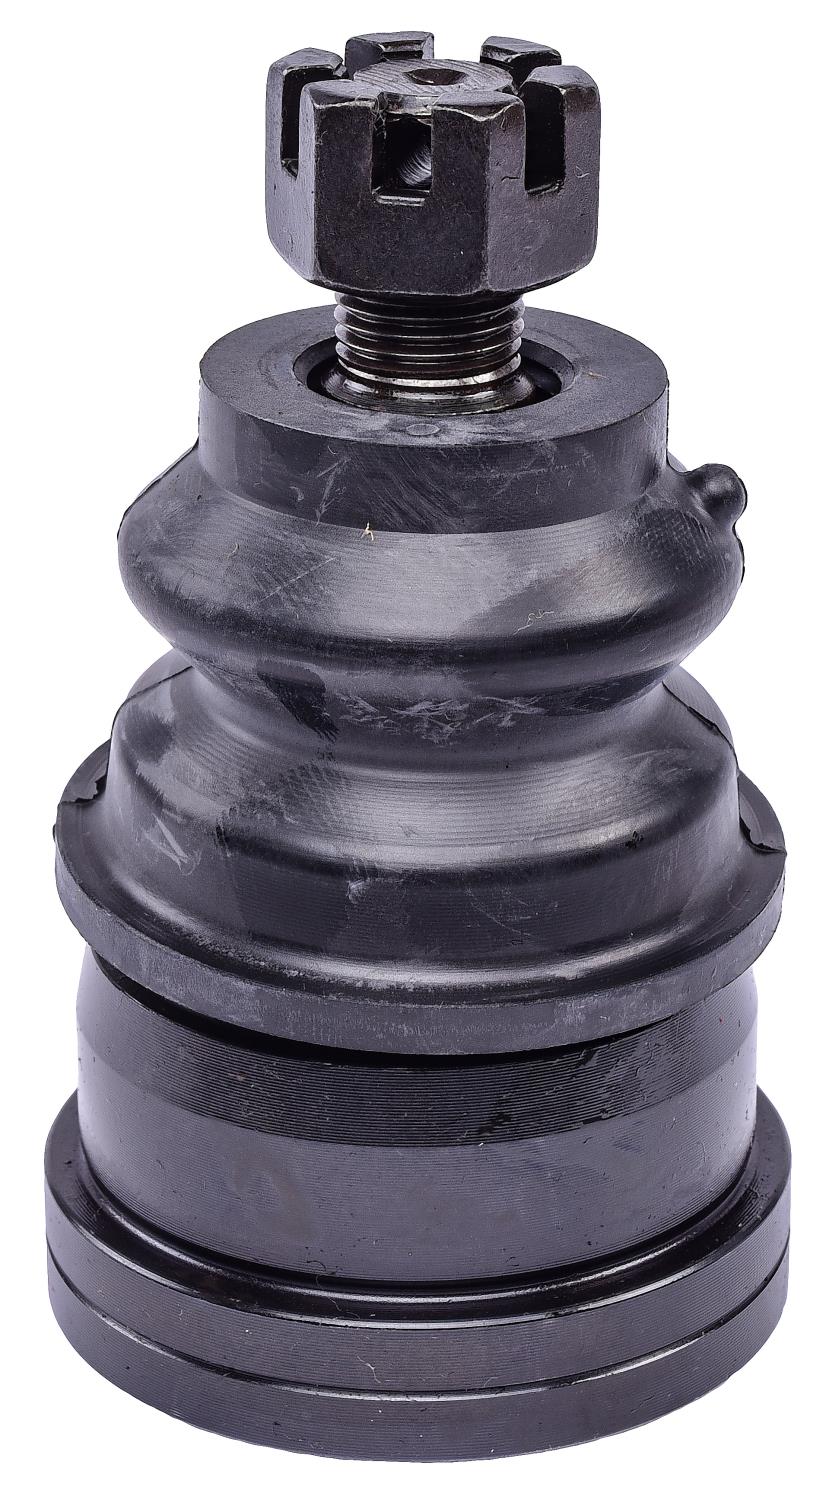 Front Lower Ball Joint Fits Select 1970-2005 GM Buick, Cadillac, Chevy, GMC, Isuzu, Oldsmobile, Pontiac